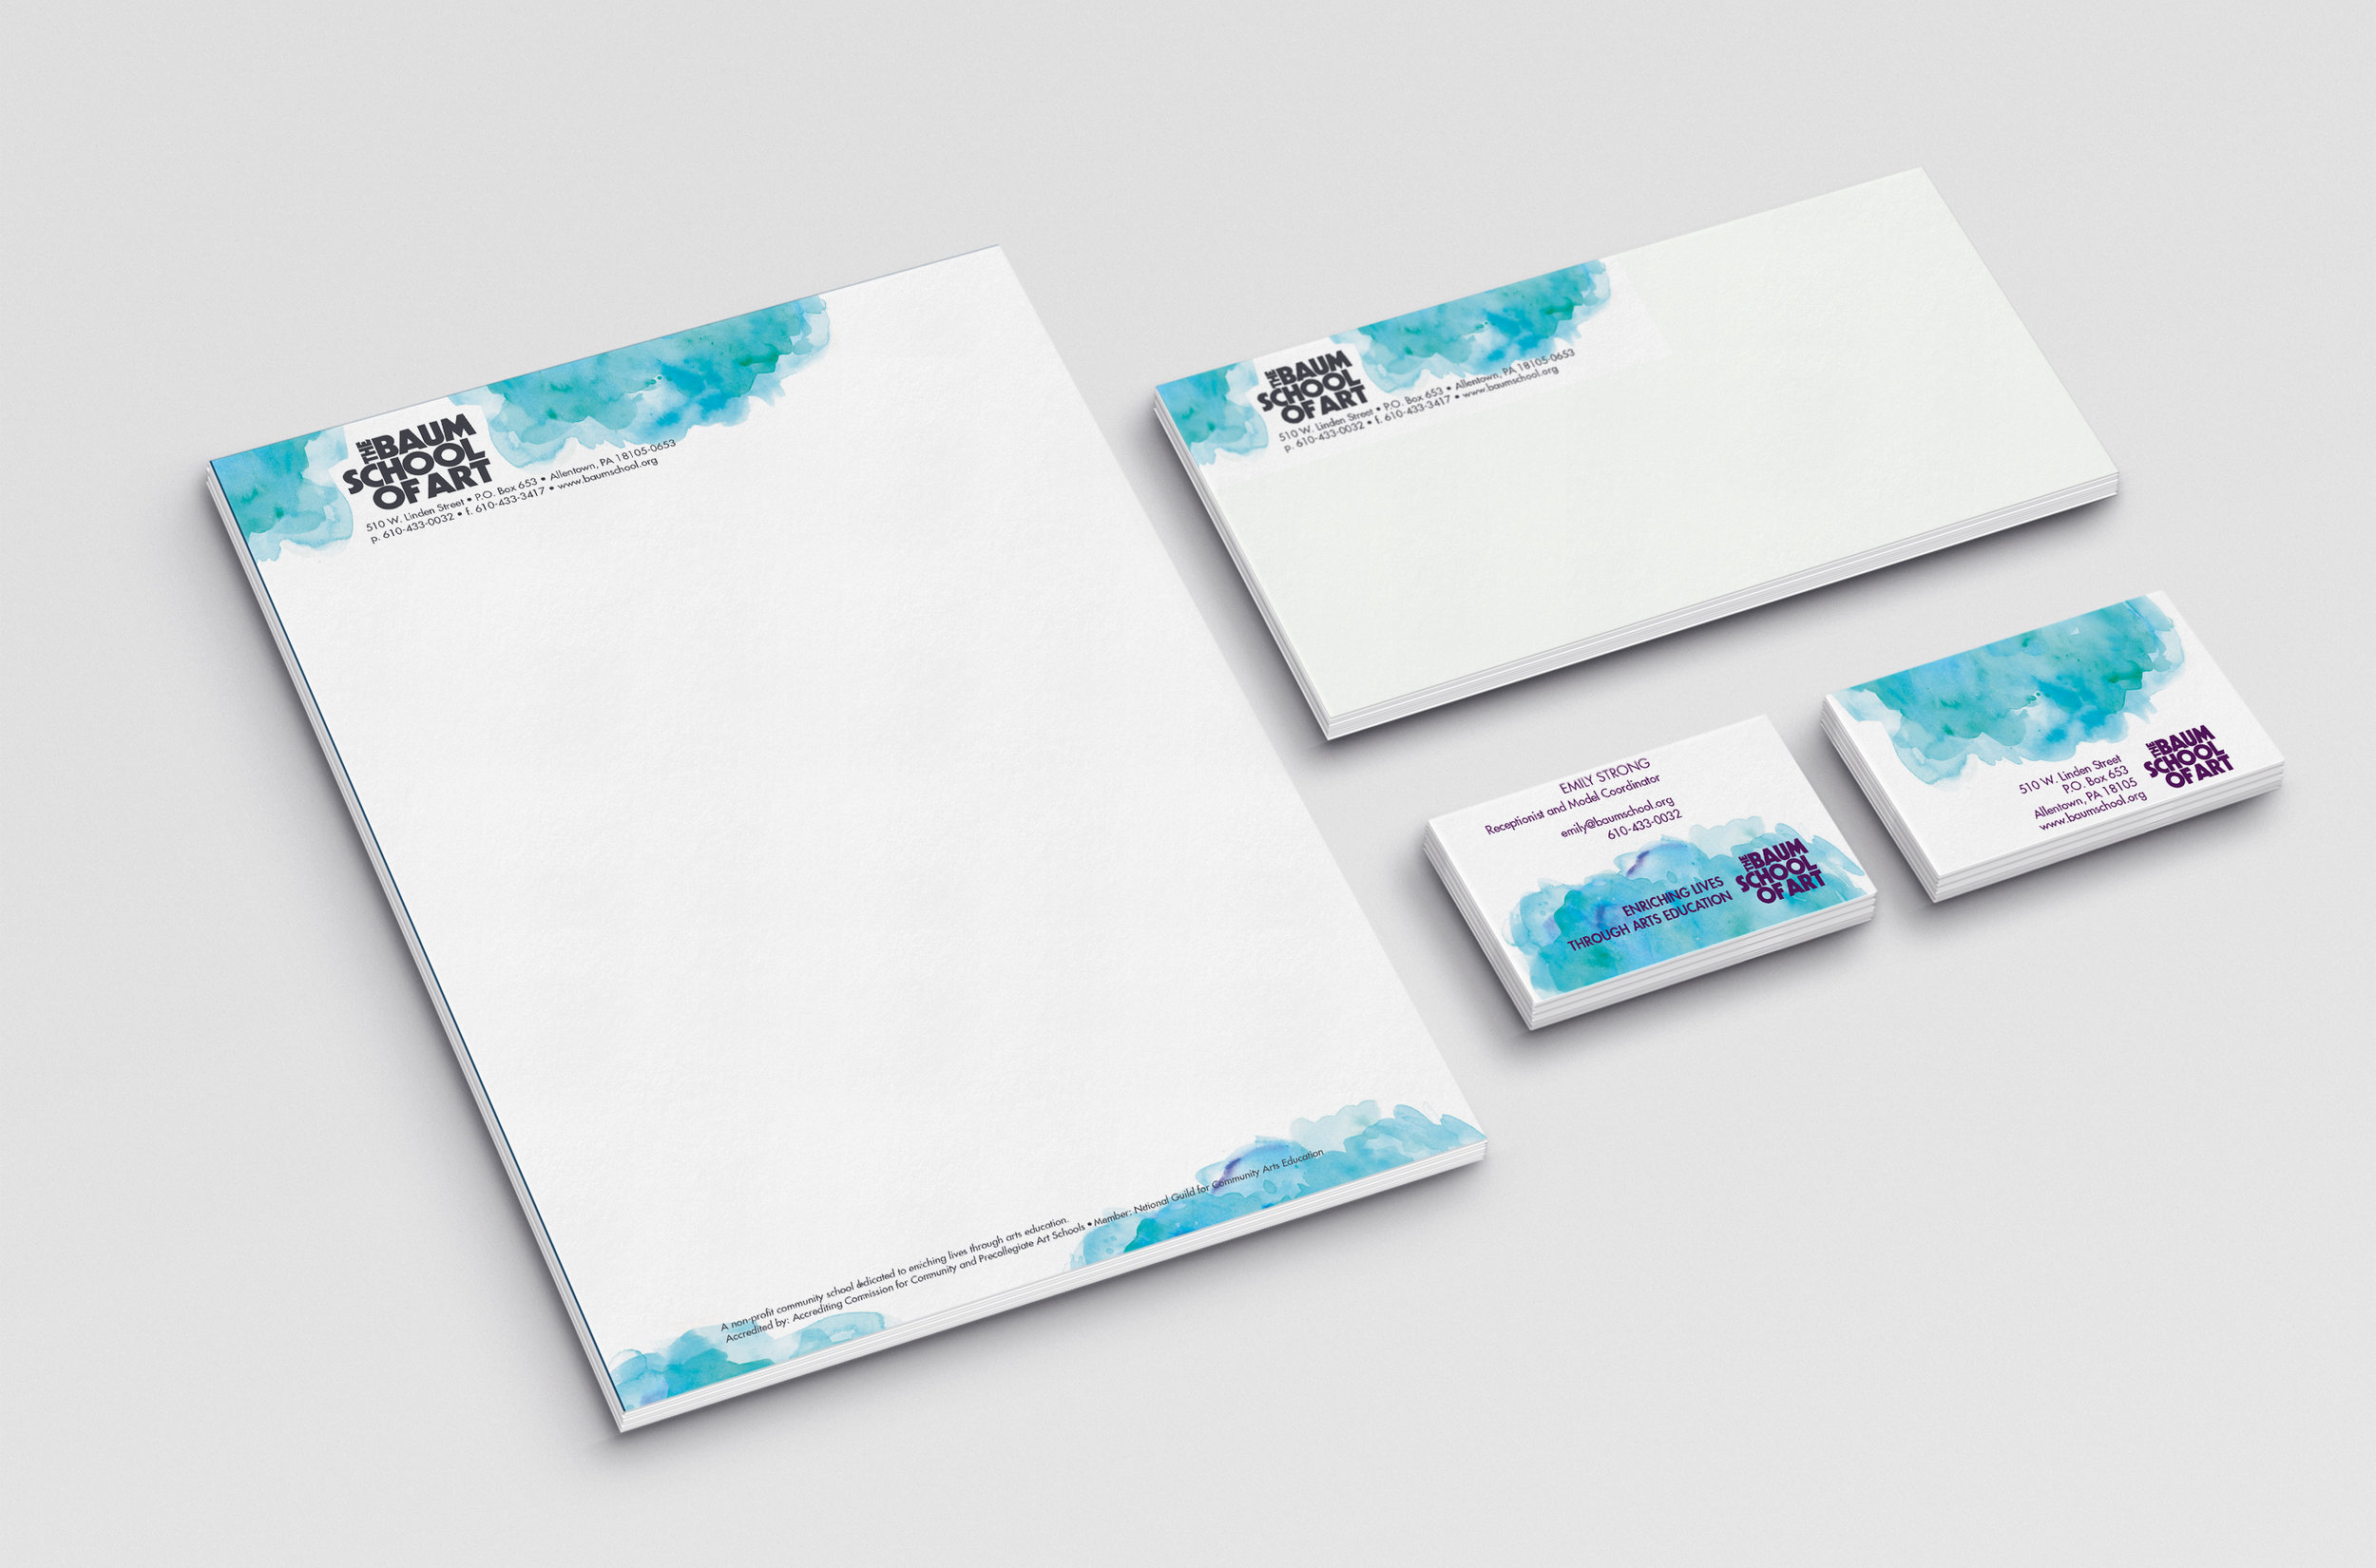   Baum School of Art – Allentown, PA Non-profit Community Art School  Baum School of Art Stationery consisting of letterhead, envelope, and double-sided business cards. 